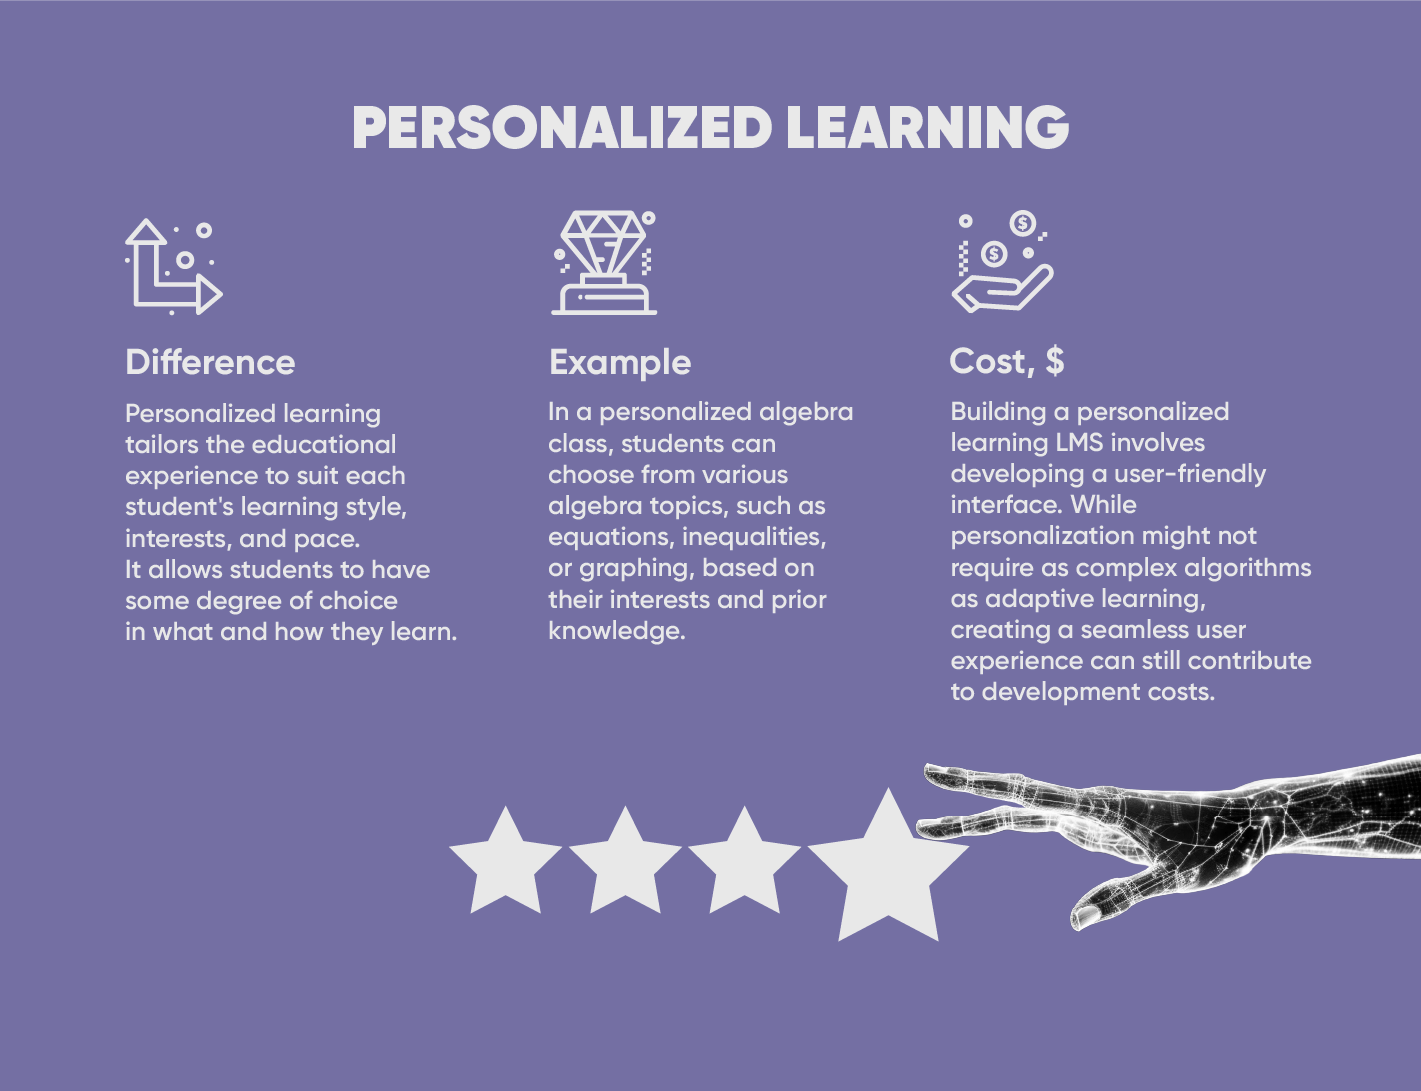 What personalized learning truly entails